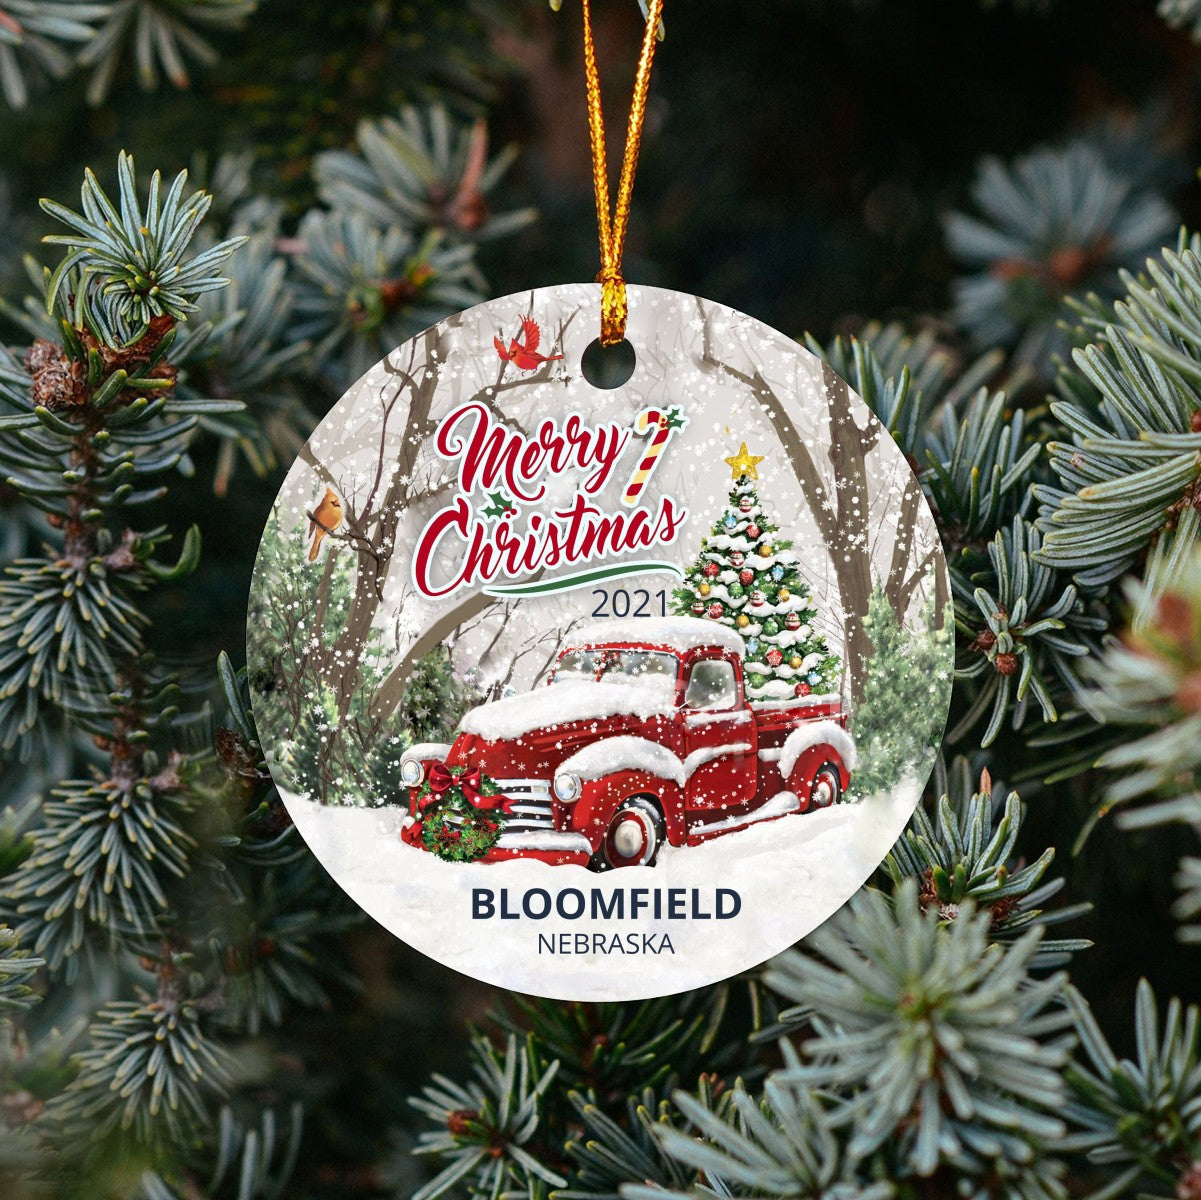 Christmas Tree Ornaments Bloomfield - Ornament With Name City, State Bloomfield Nebraska NE Ornament - Red Truck Xmas Ornaments 3'' Plastic Gift For Family, Friend And Housewarming